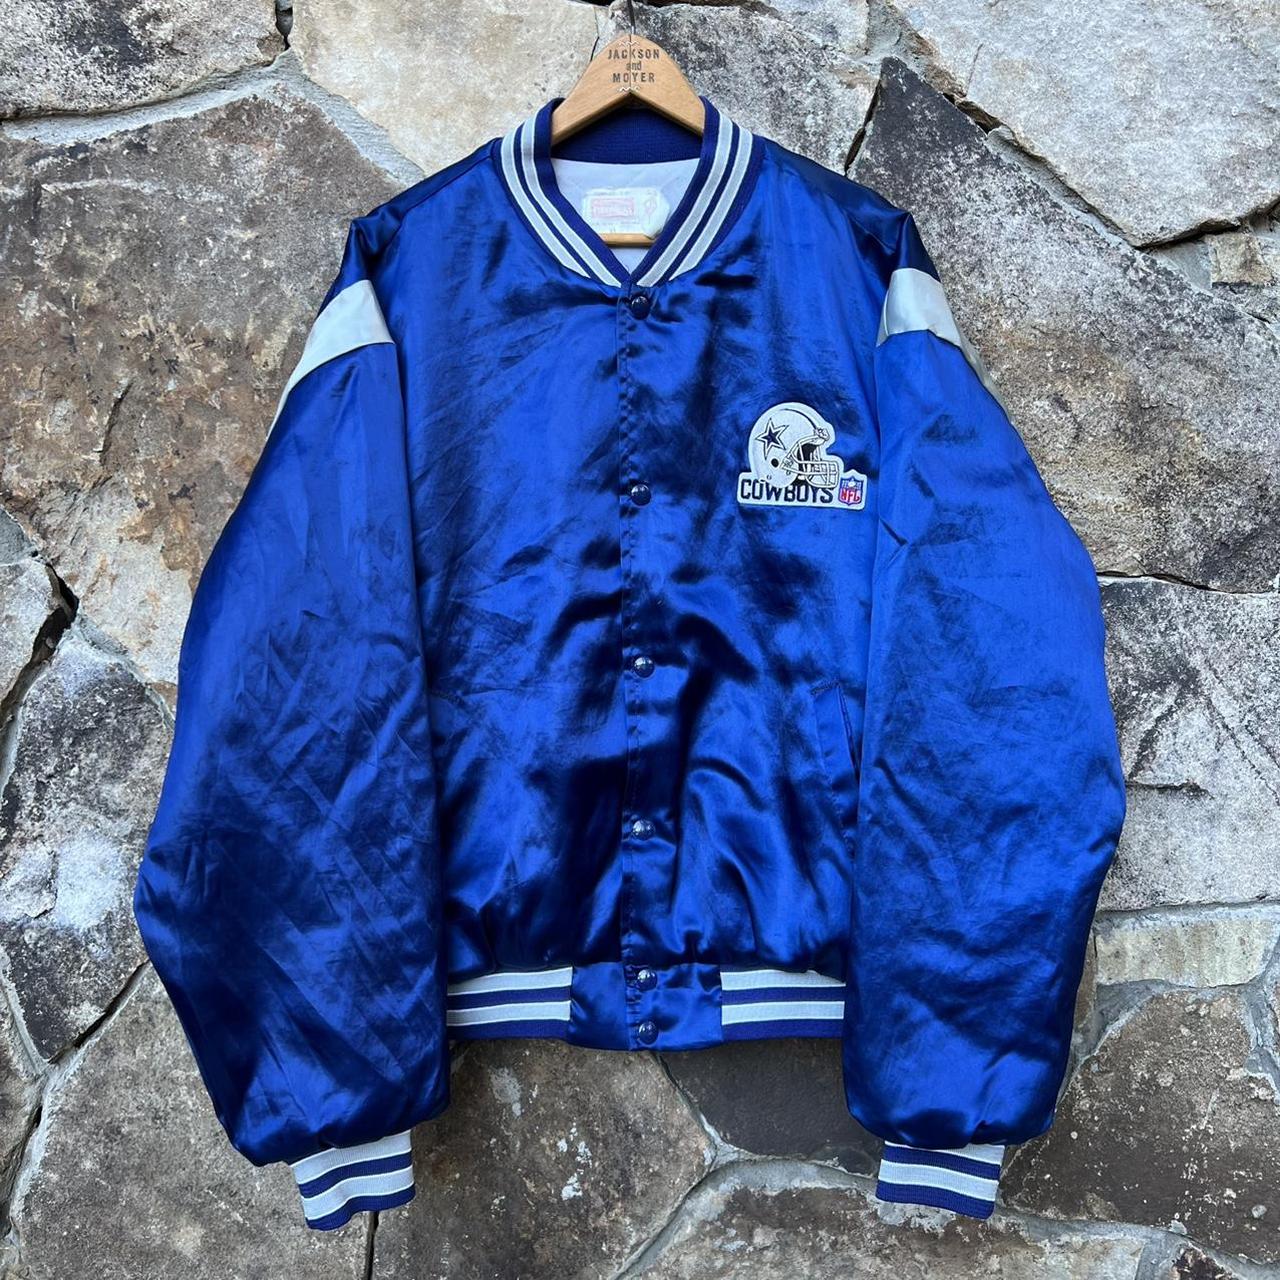 American Vintage Men's Navy and White Jacket